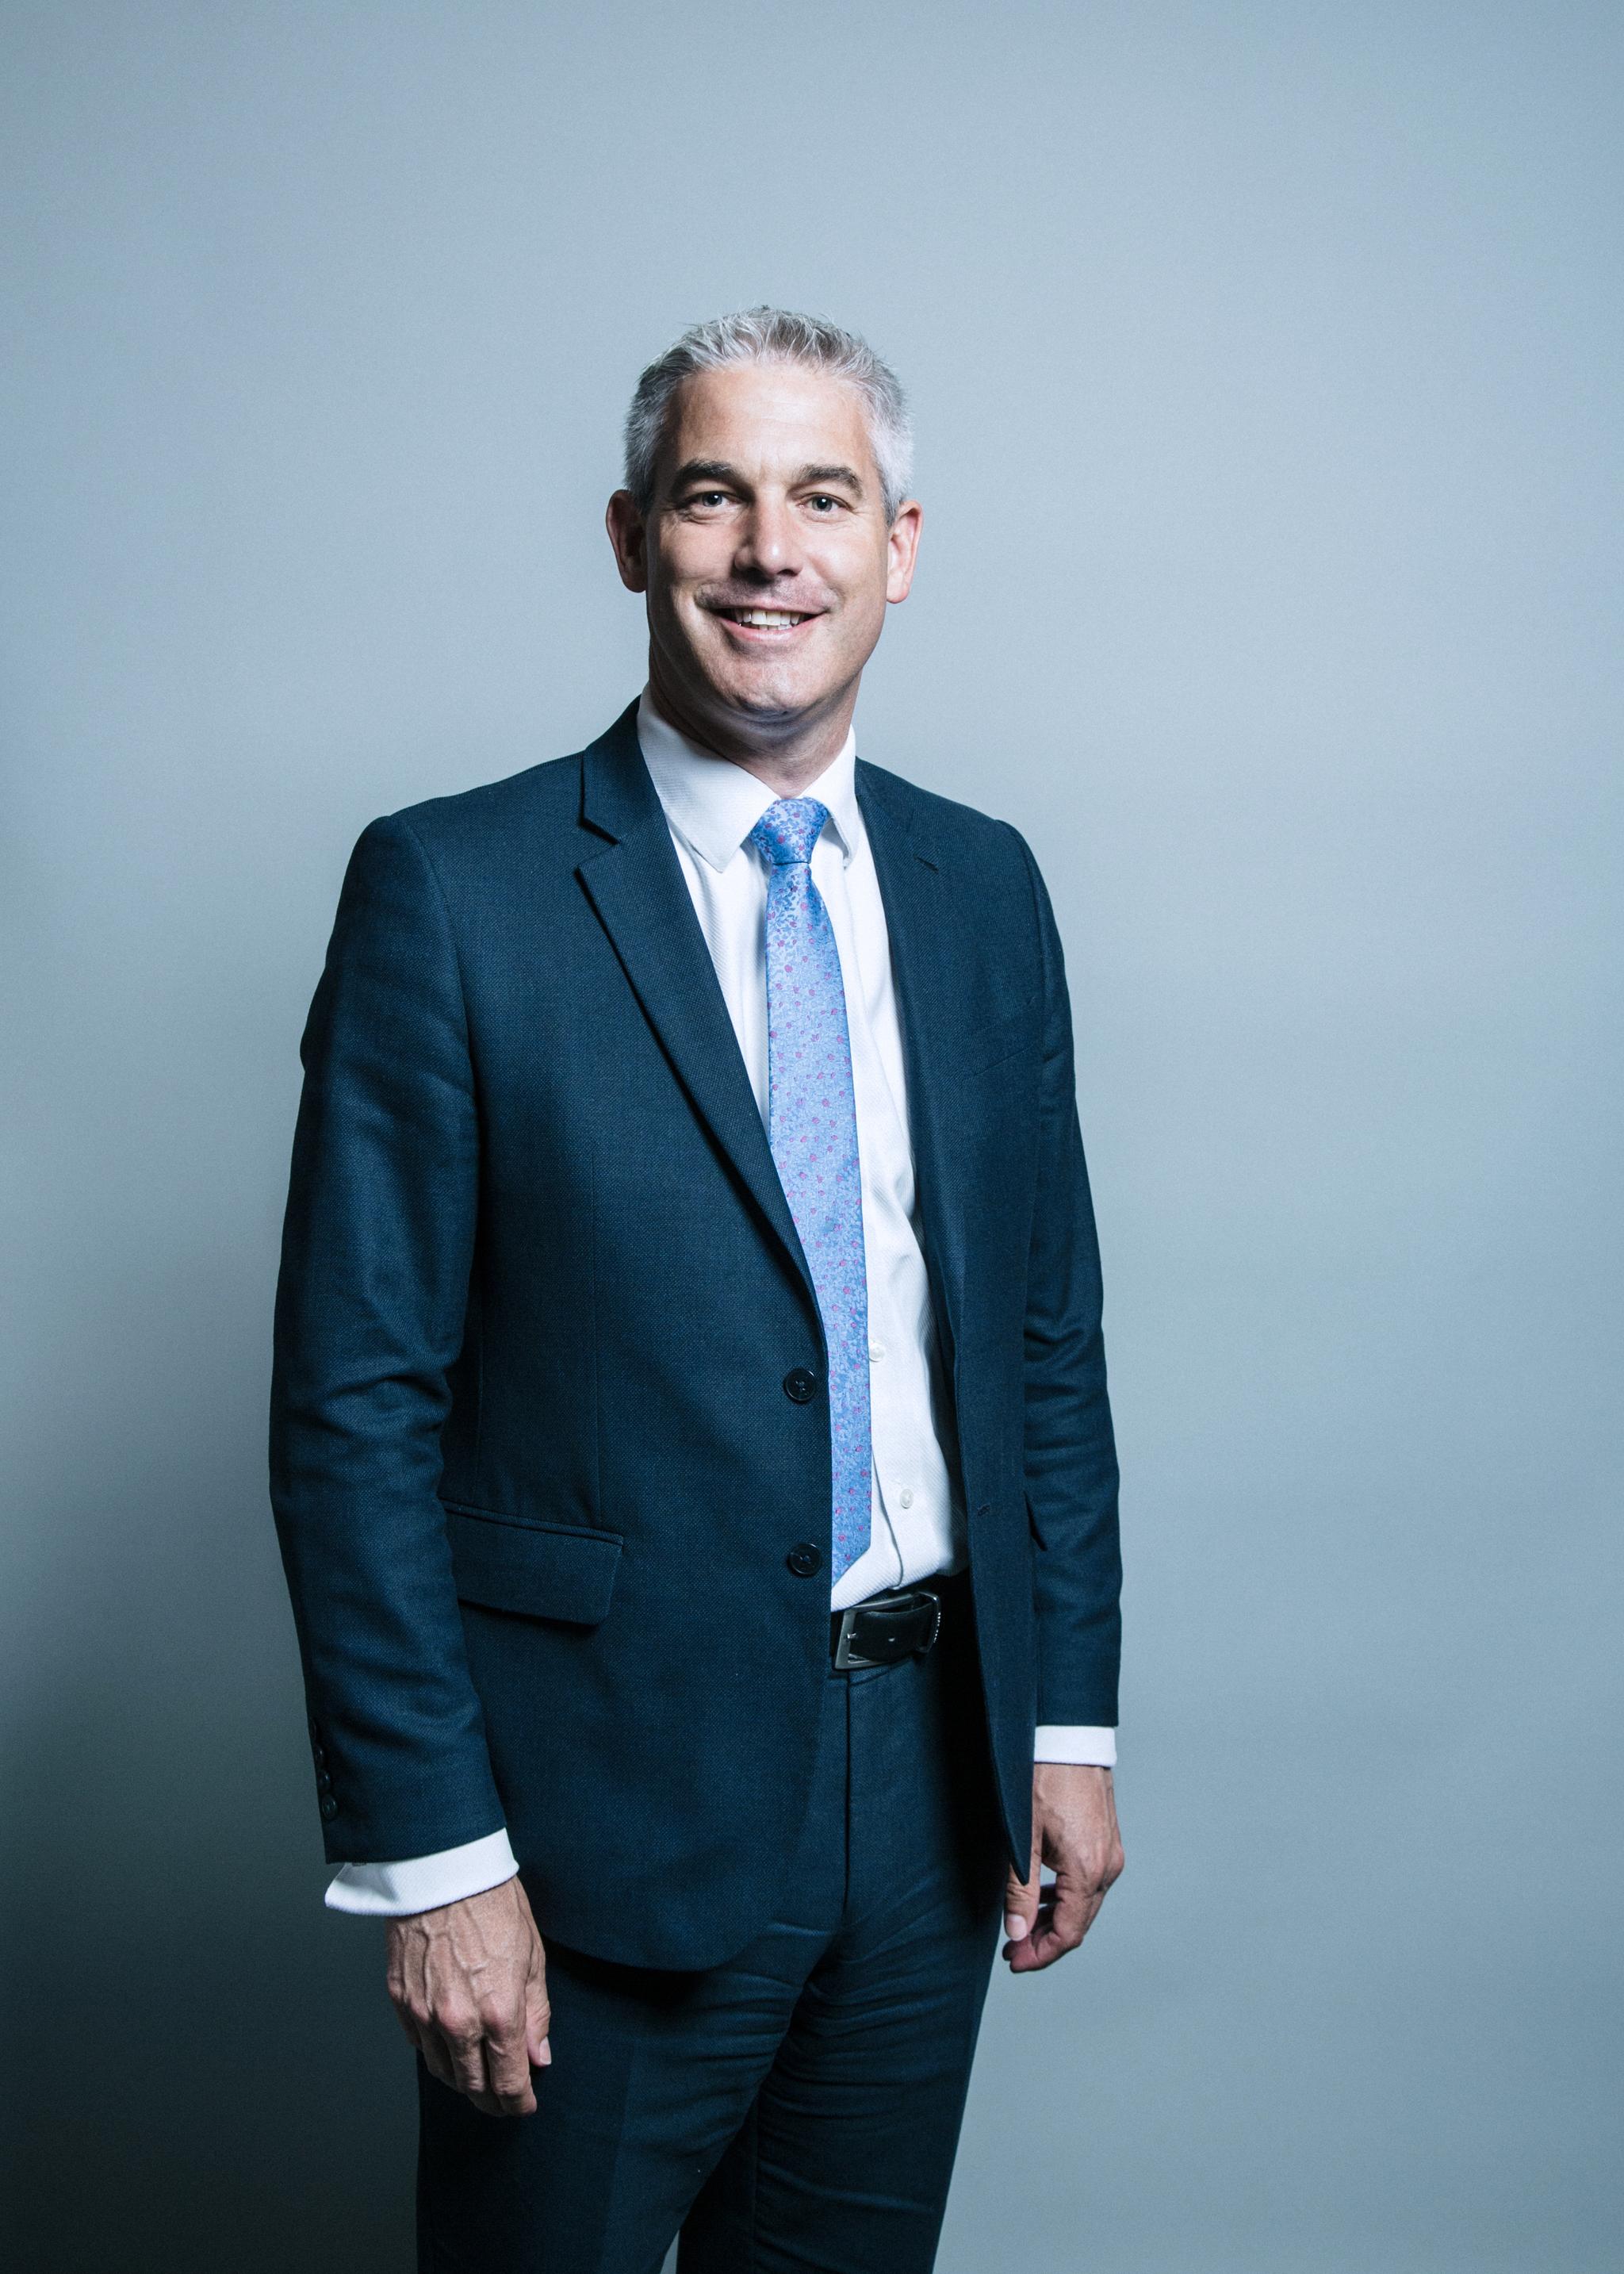 Health Minister Stephen Barclay will be the UK’s new Brexit minister